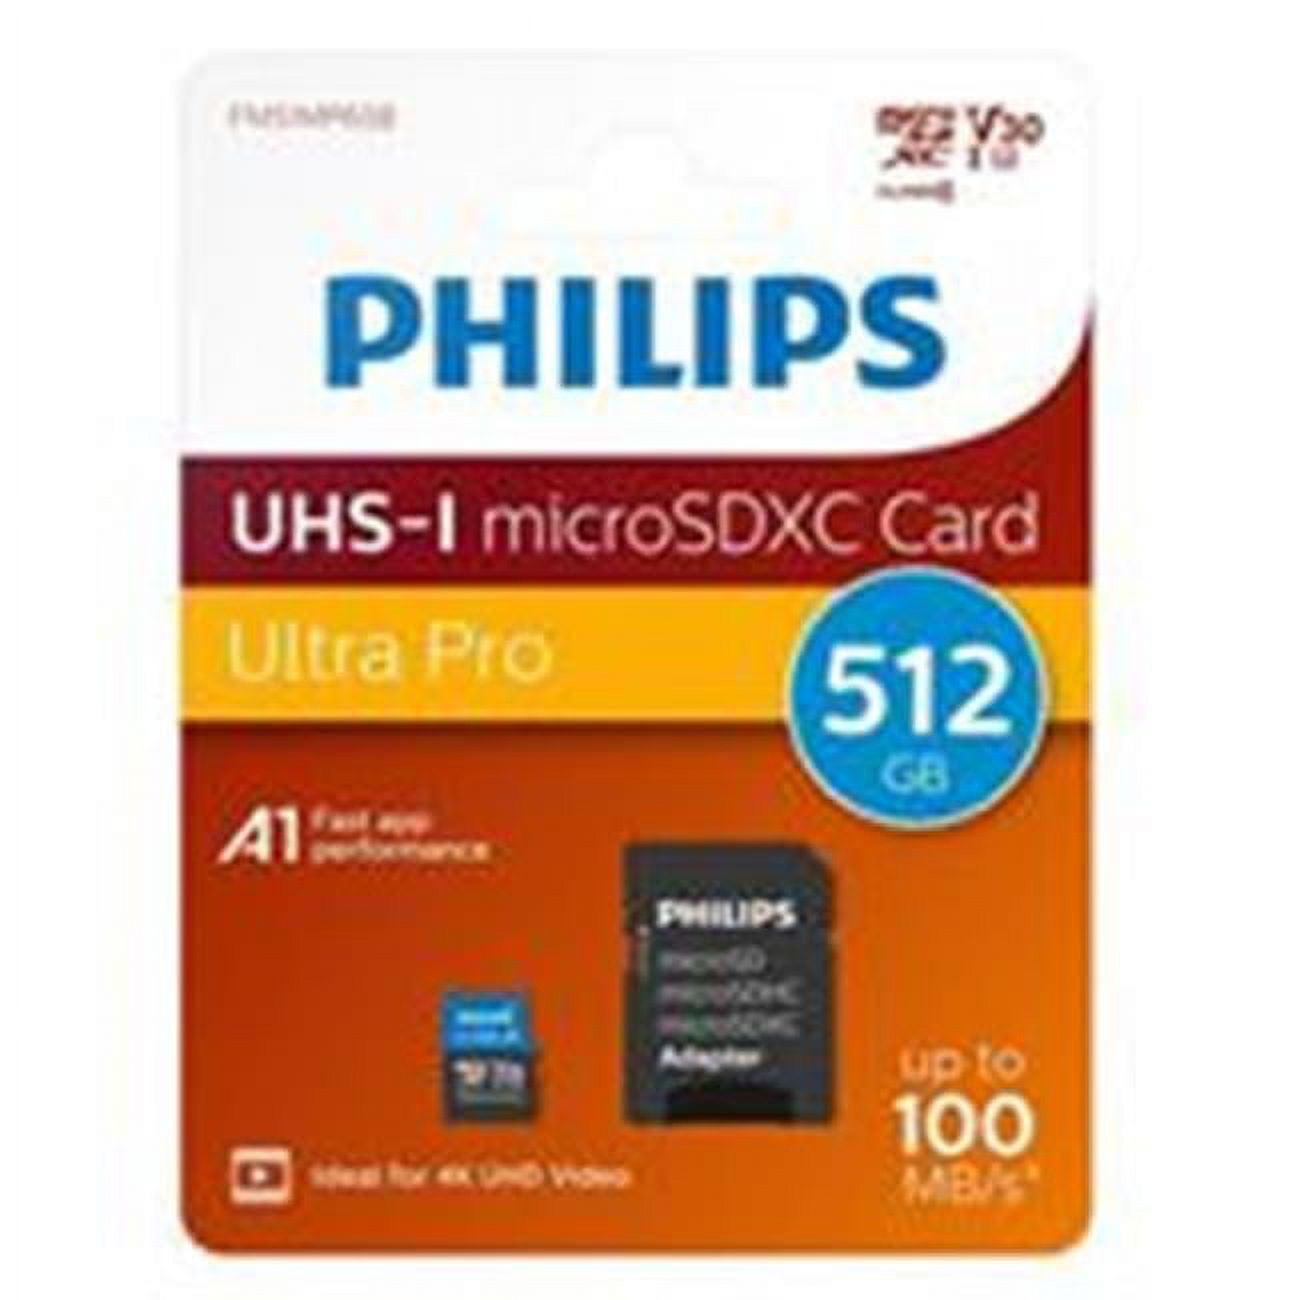 Picture of Philips PHMSDA512GUHSIU3CA MicroSDXC Cl10 UHS-I U3 512GB Flash Memory Card with Adapter